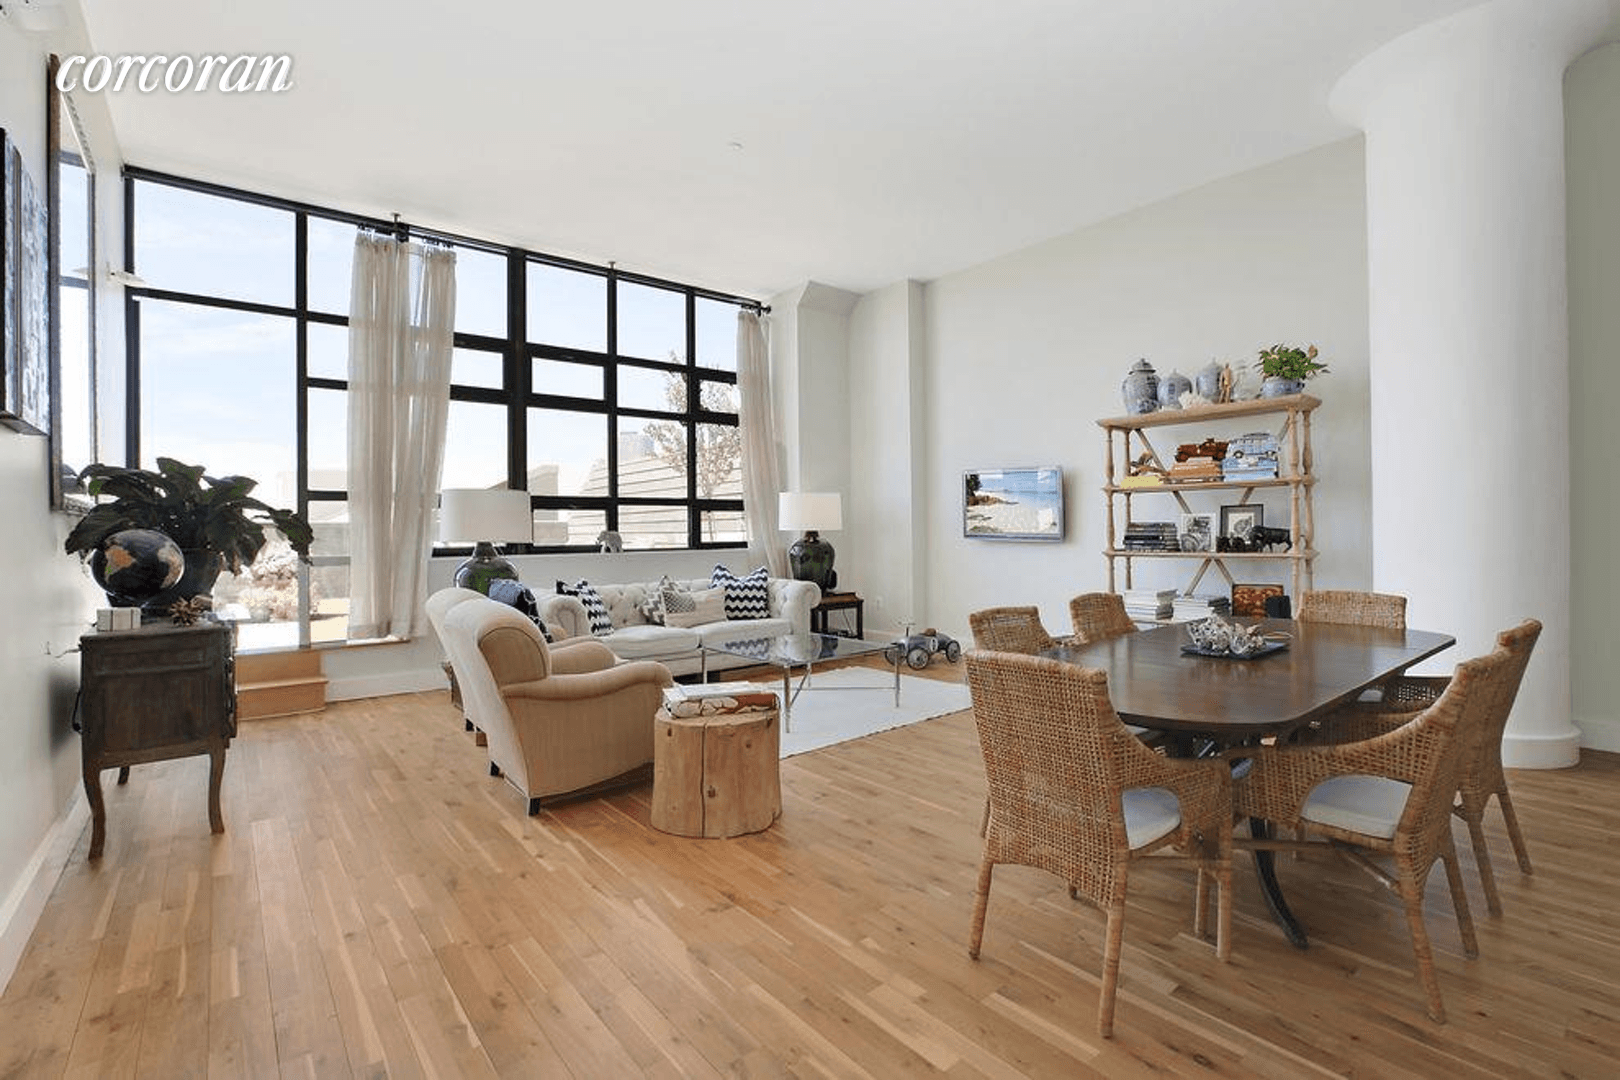 Available Immediately ! This is the perfect Brooklyn Heights 3 bedroom, 2.